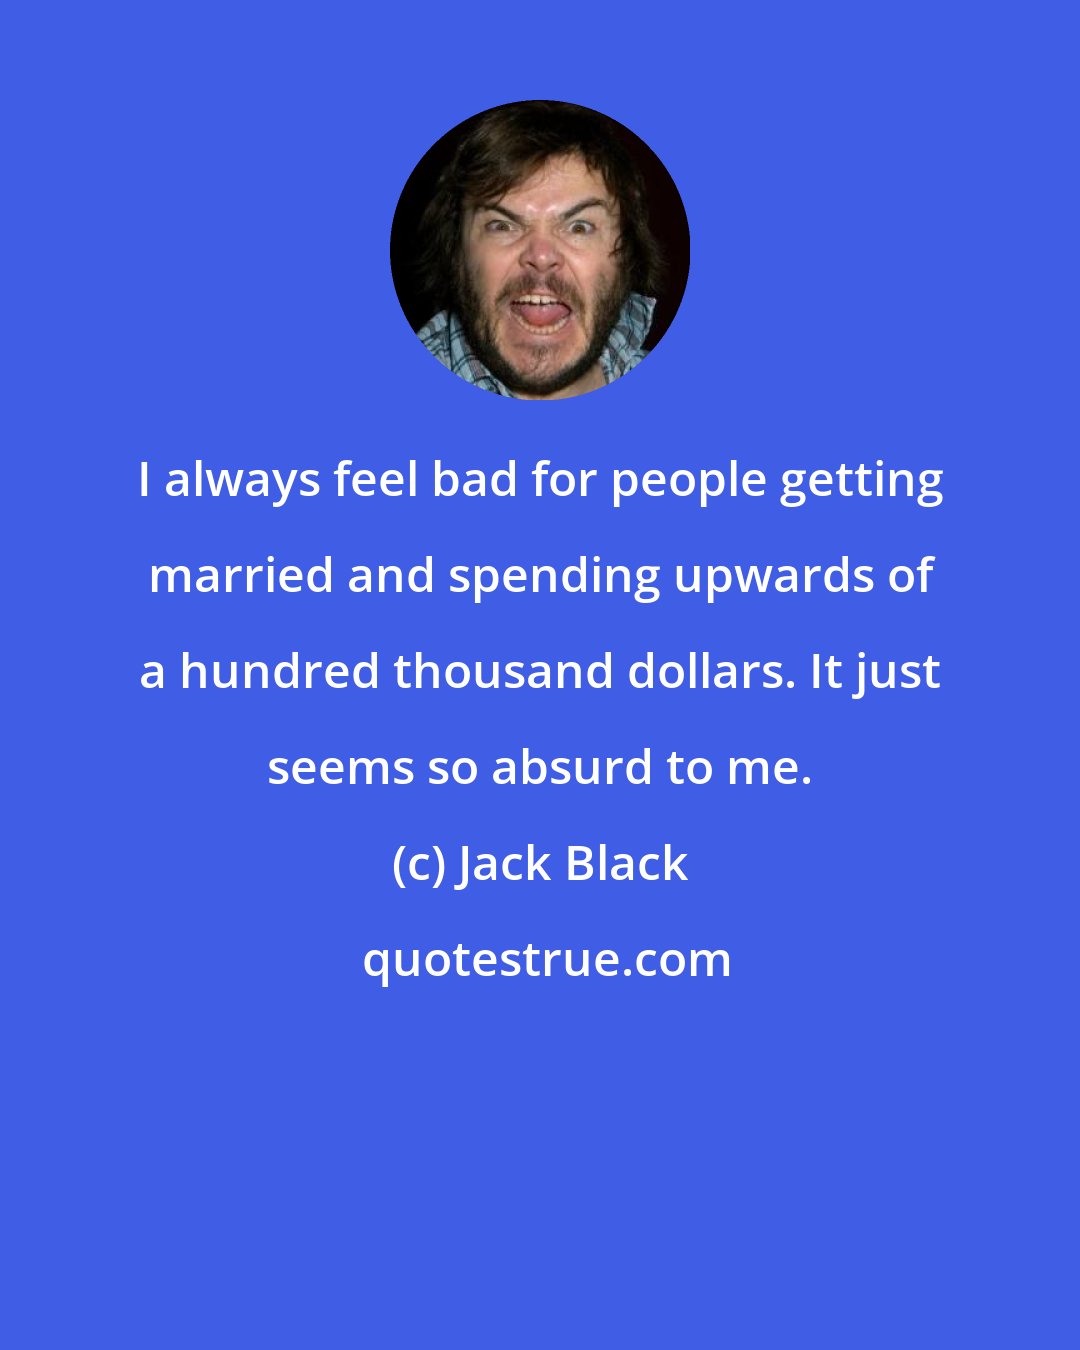 Jack Black: I always feel bad for people getting married and spending upwards of a hundred thousand dollars. It just seems so absurd to me.